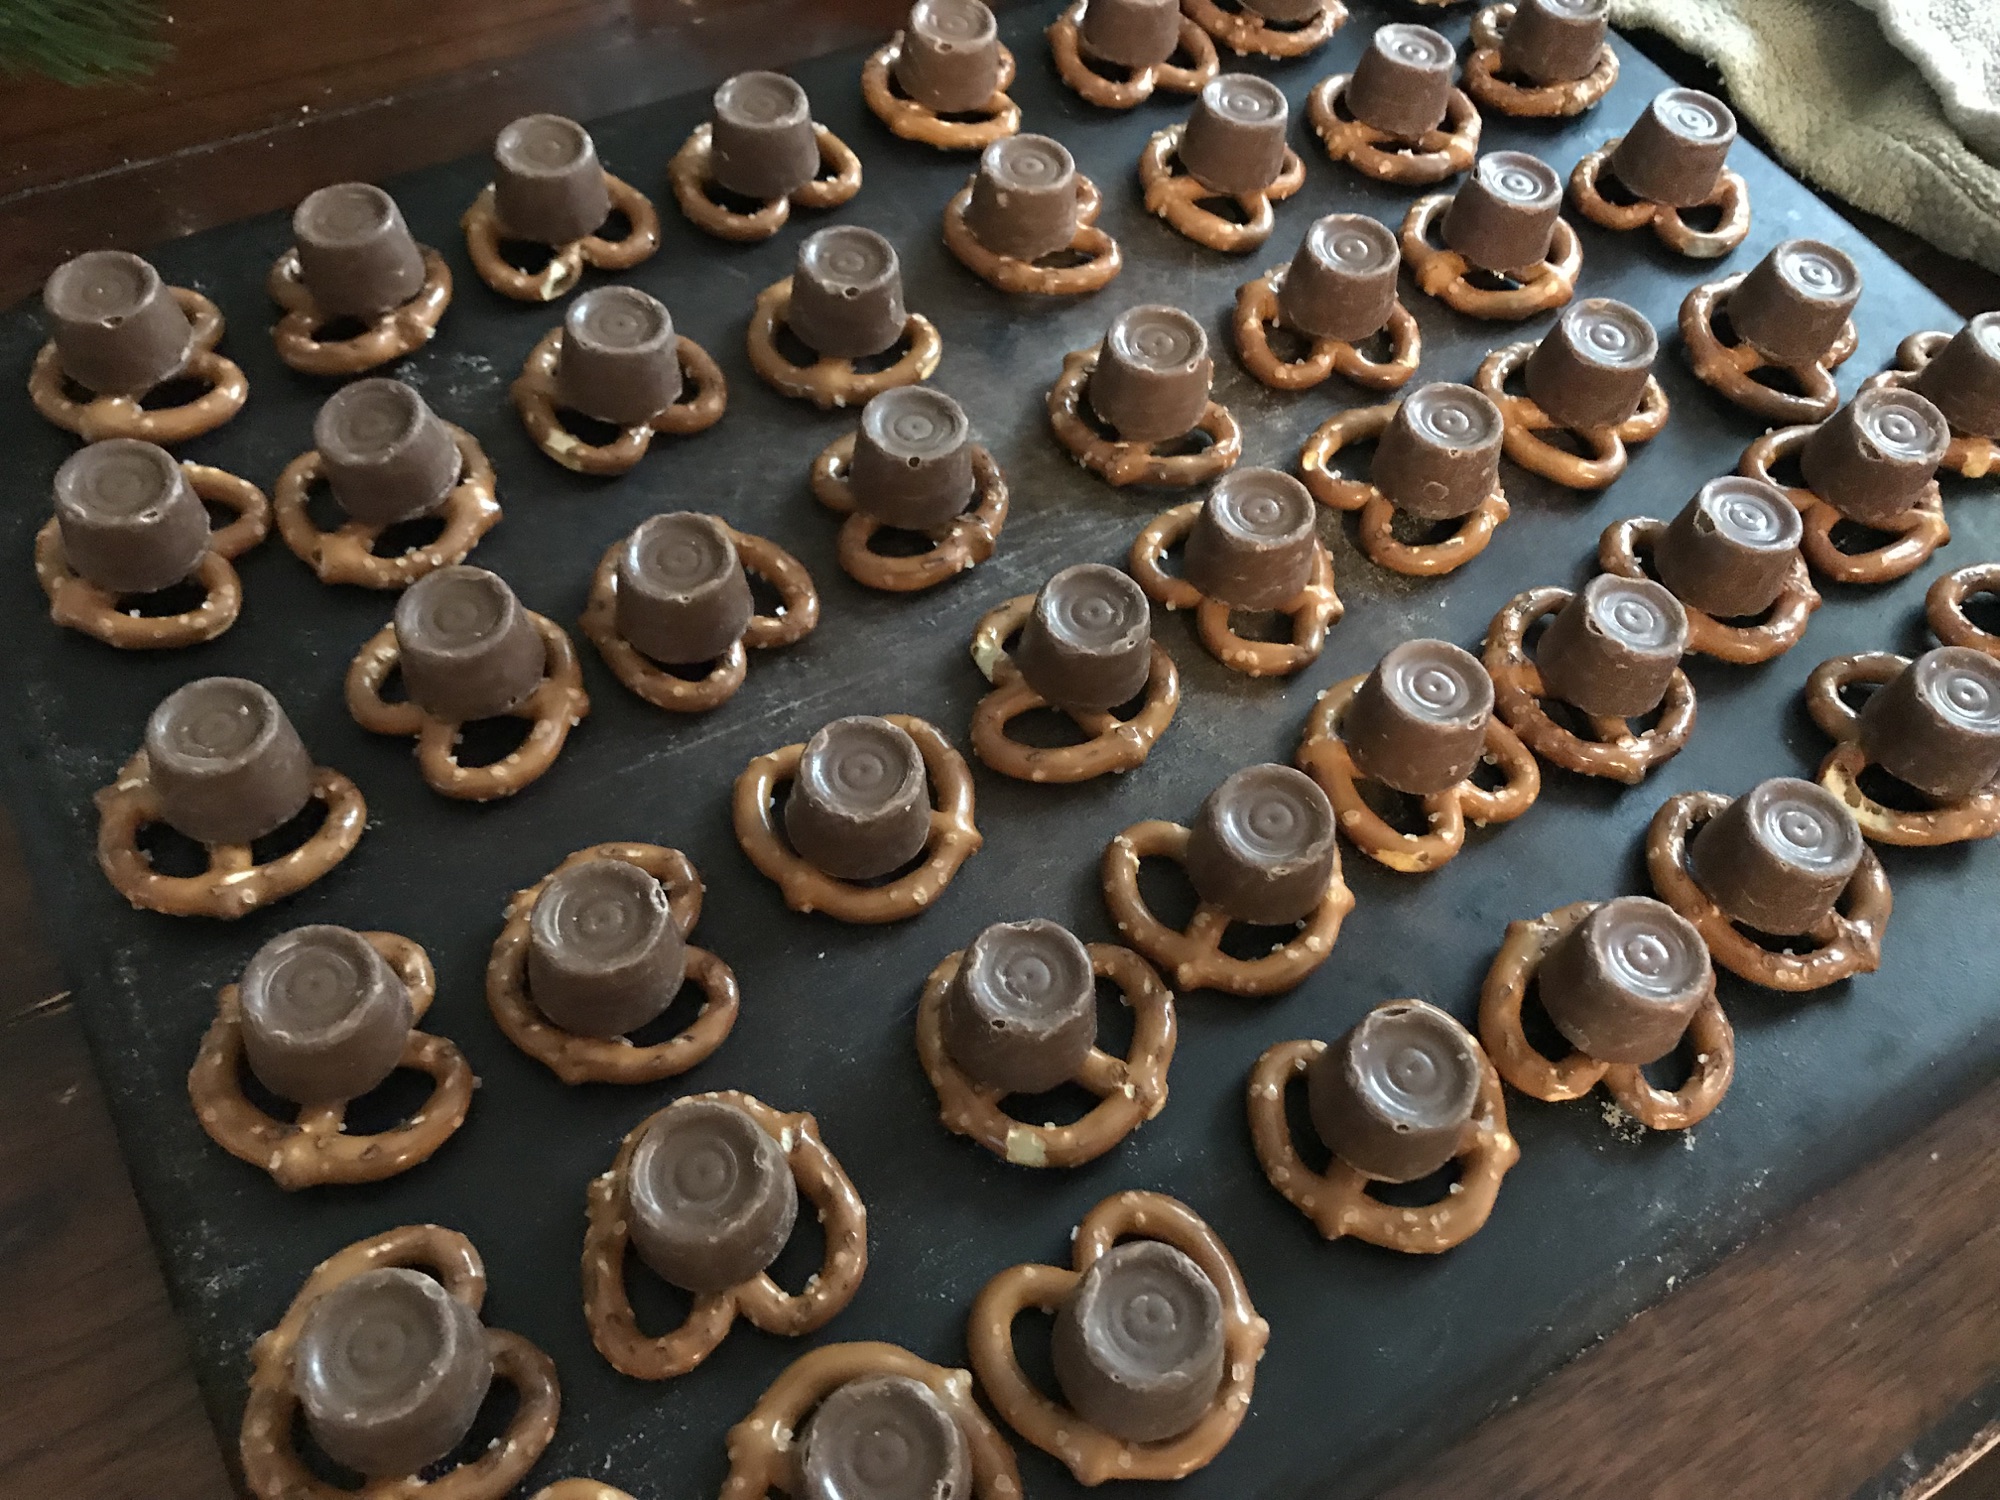 Making delicious simple cookies with rolos and pretzels